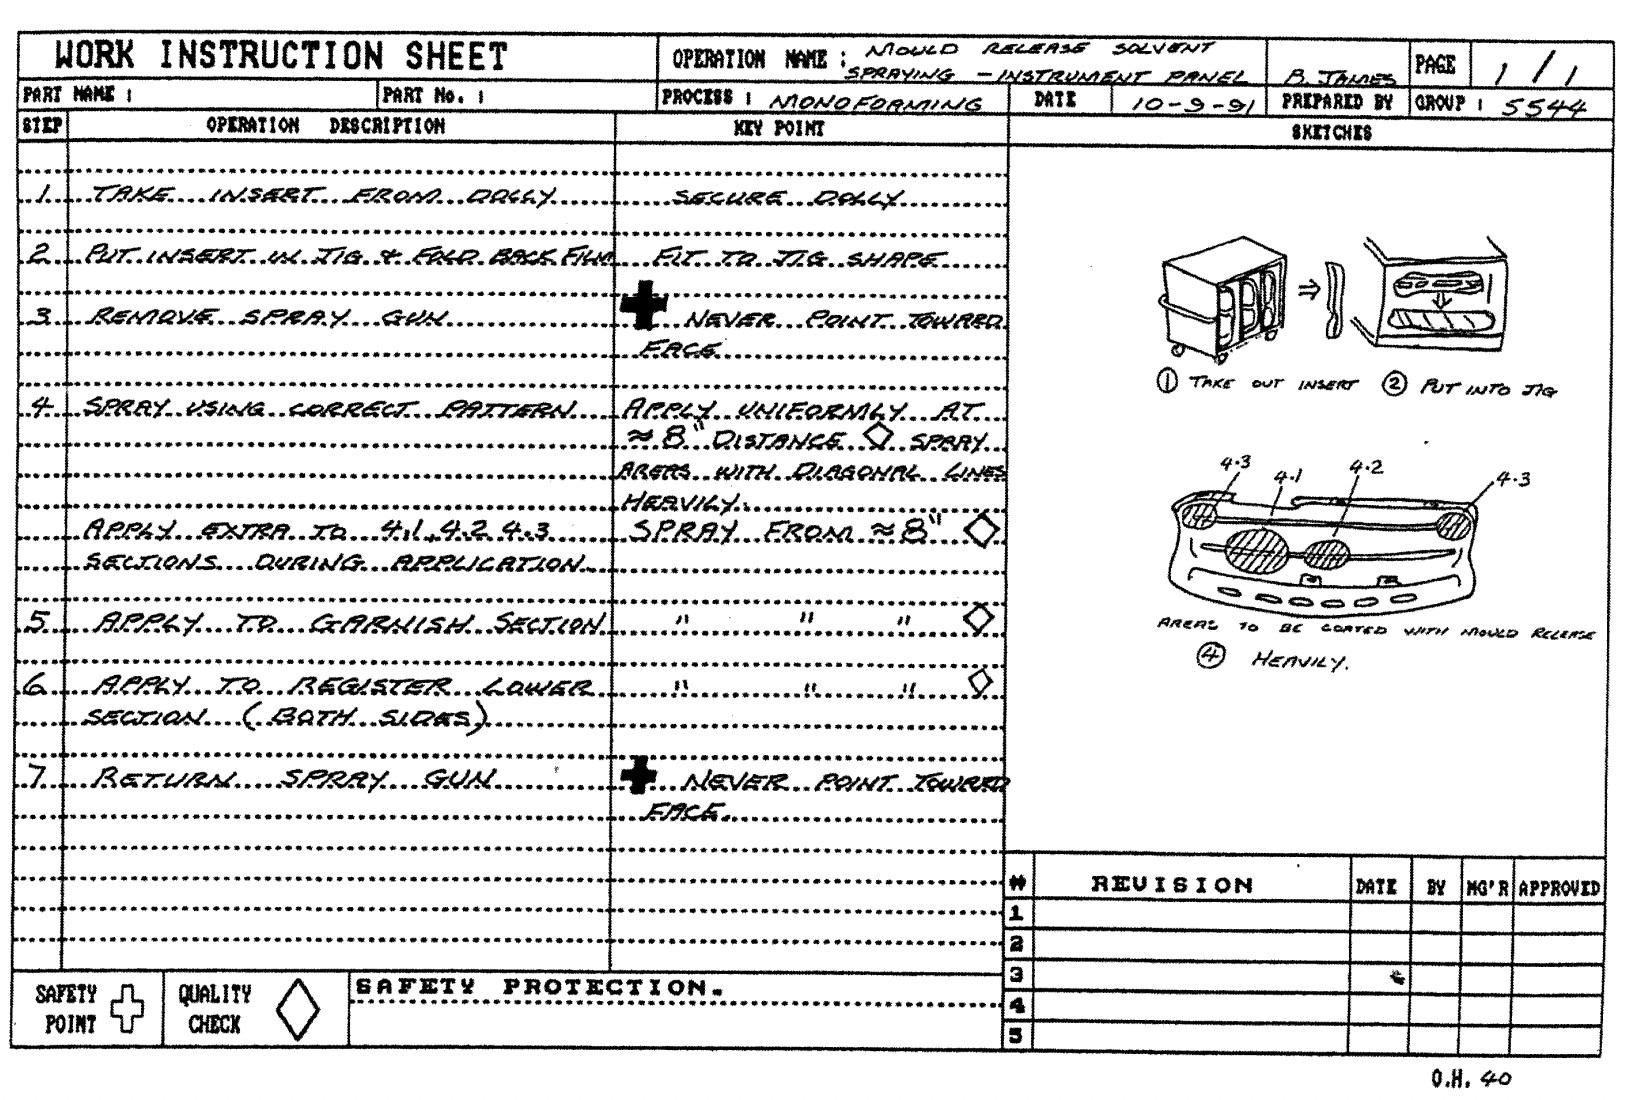 A document titled “Work instruction Sheet” lists step-by-step instructions for spraying a parts mold with solvent. Safety tips and a diagram are included. 